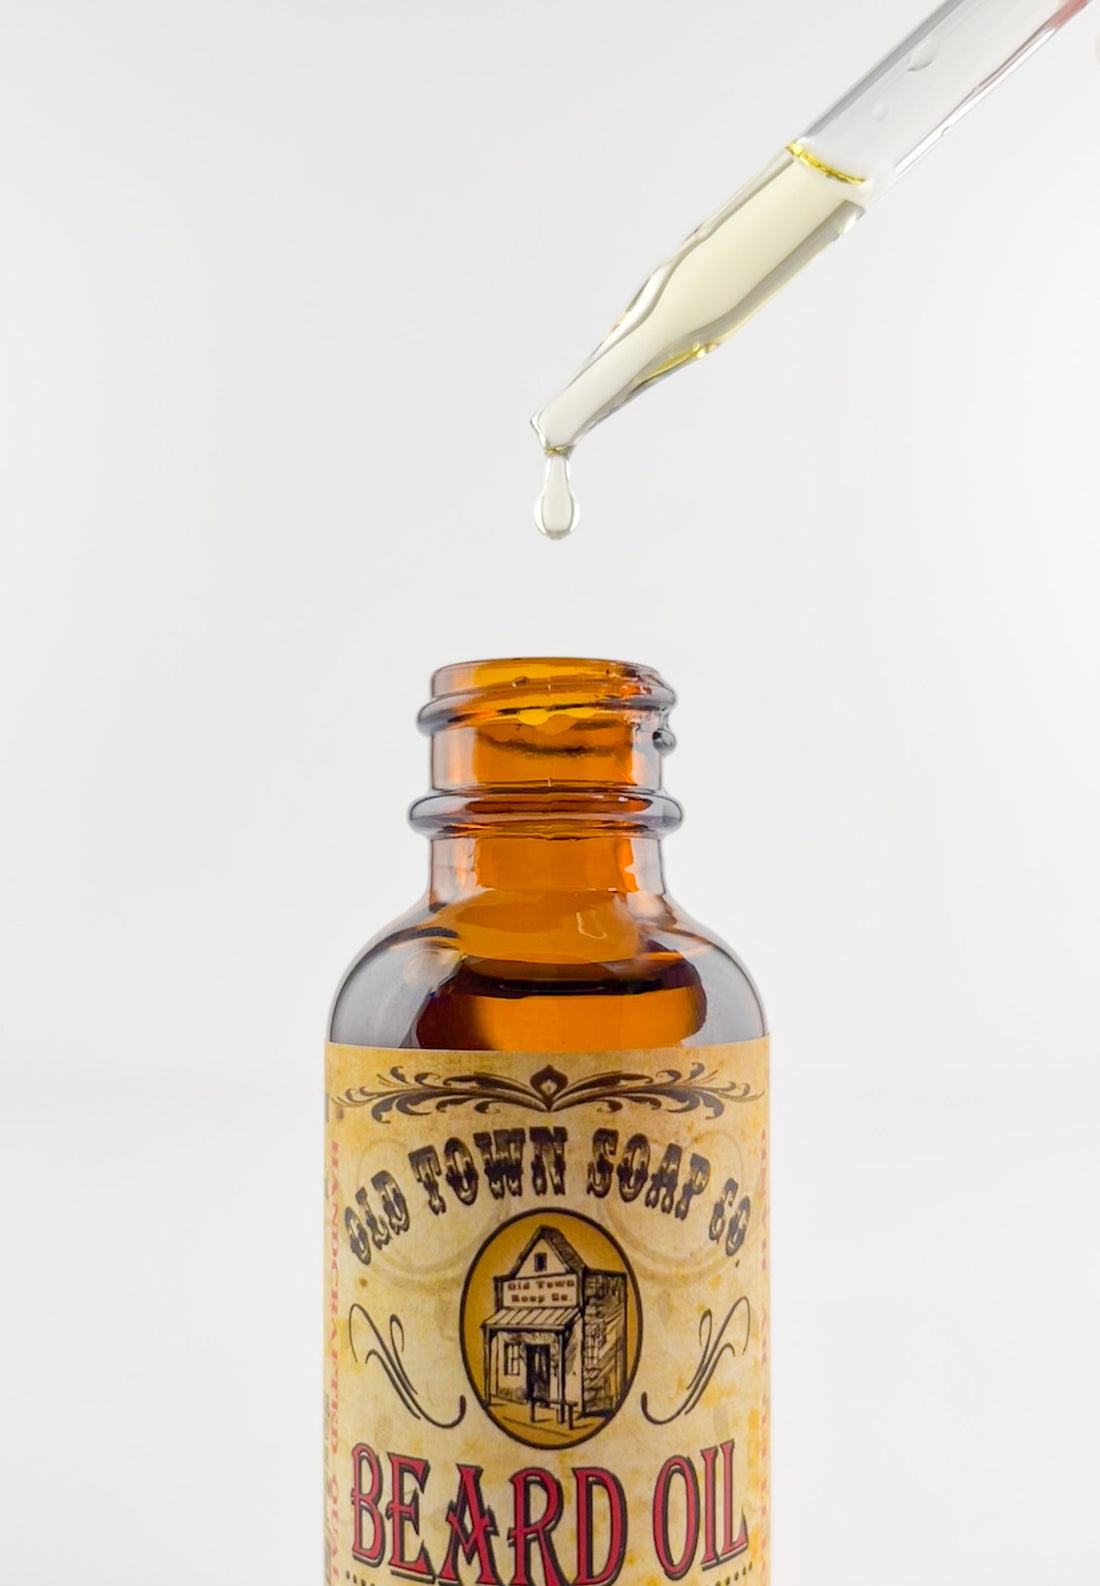 Whiskey Beard Oil - Old Town Soap Co.